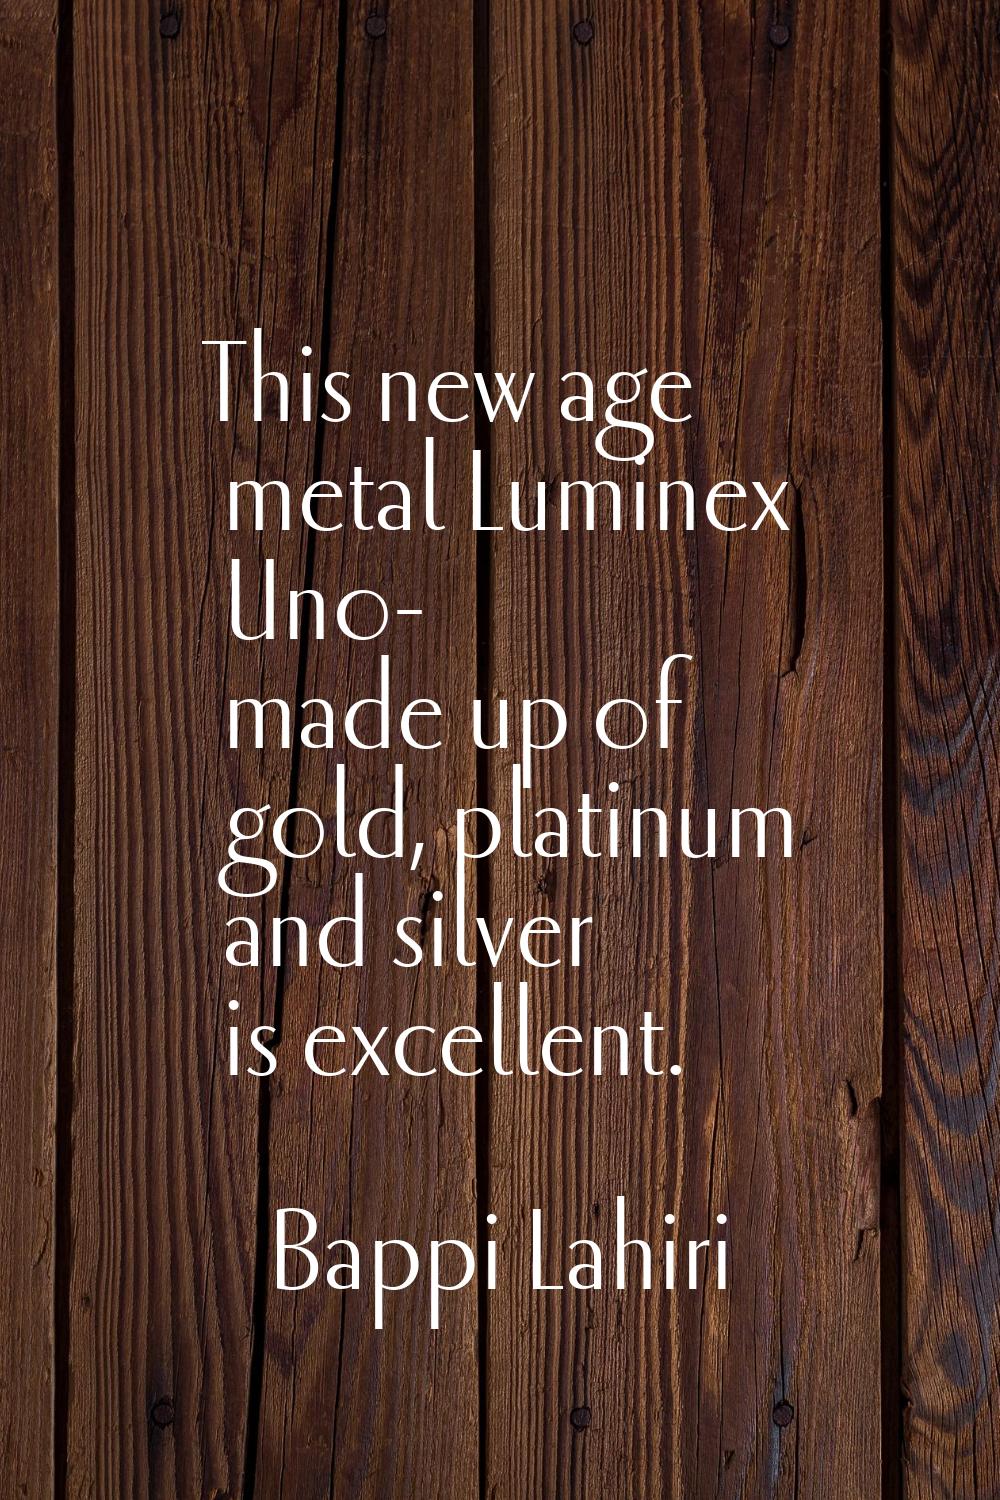 This new age metal Luminex Uno- made up of gold, platinum and silver is excellent.